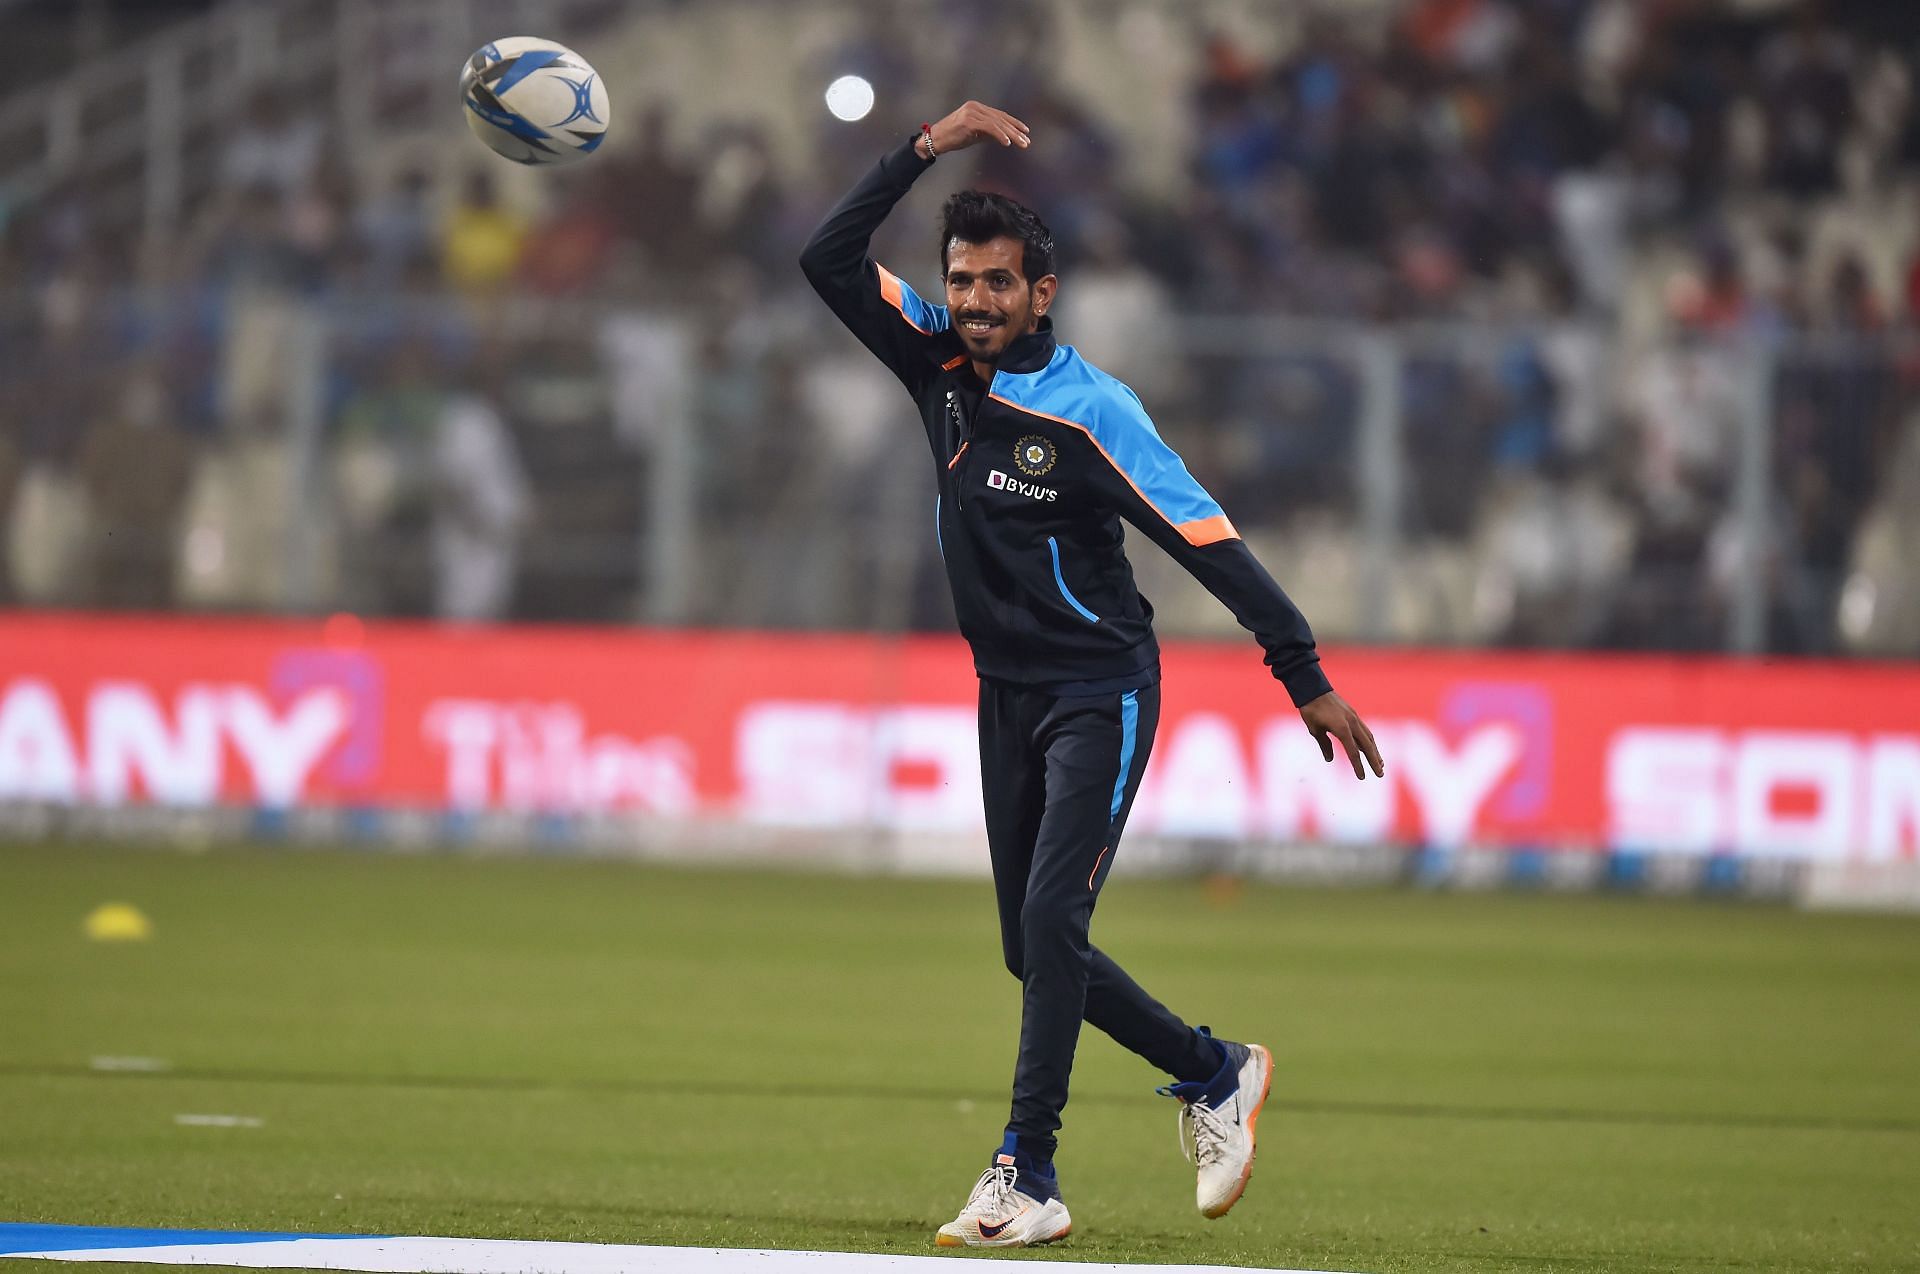 Chahal has been in great form